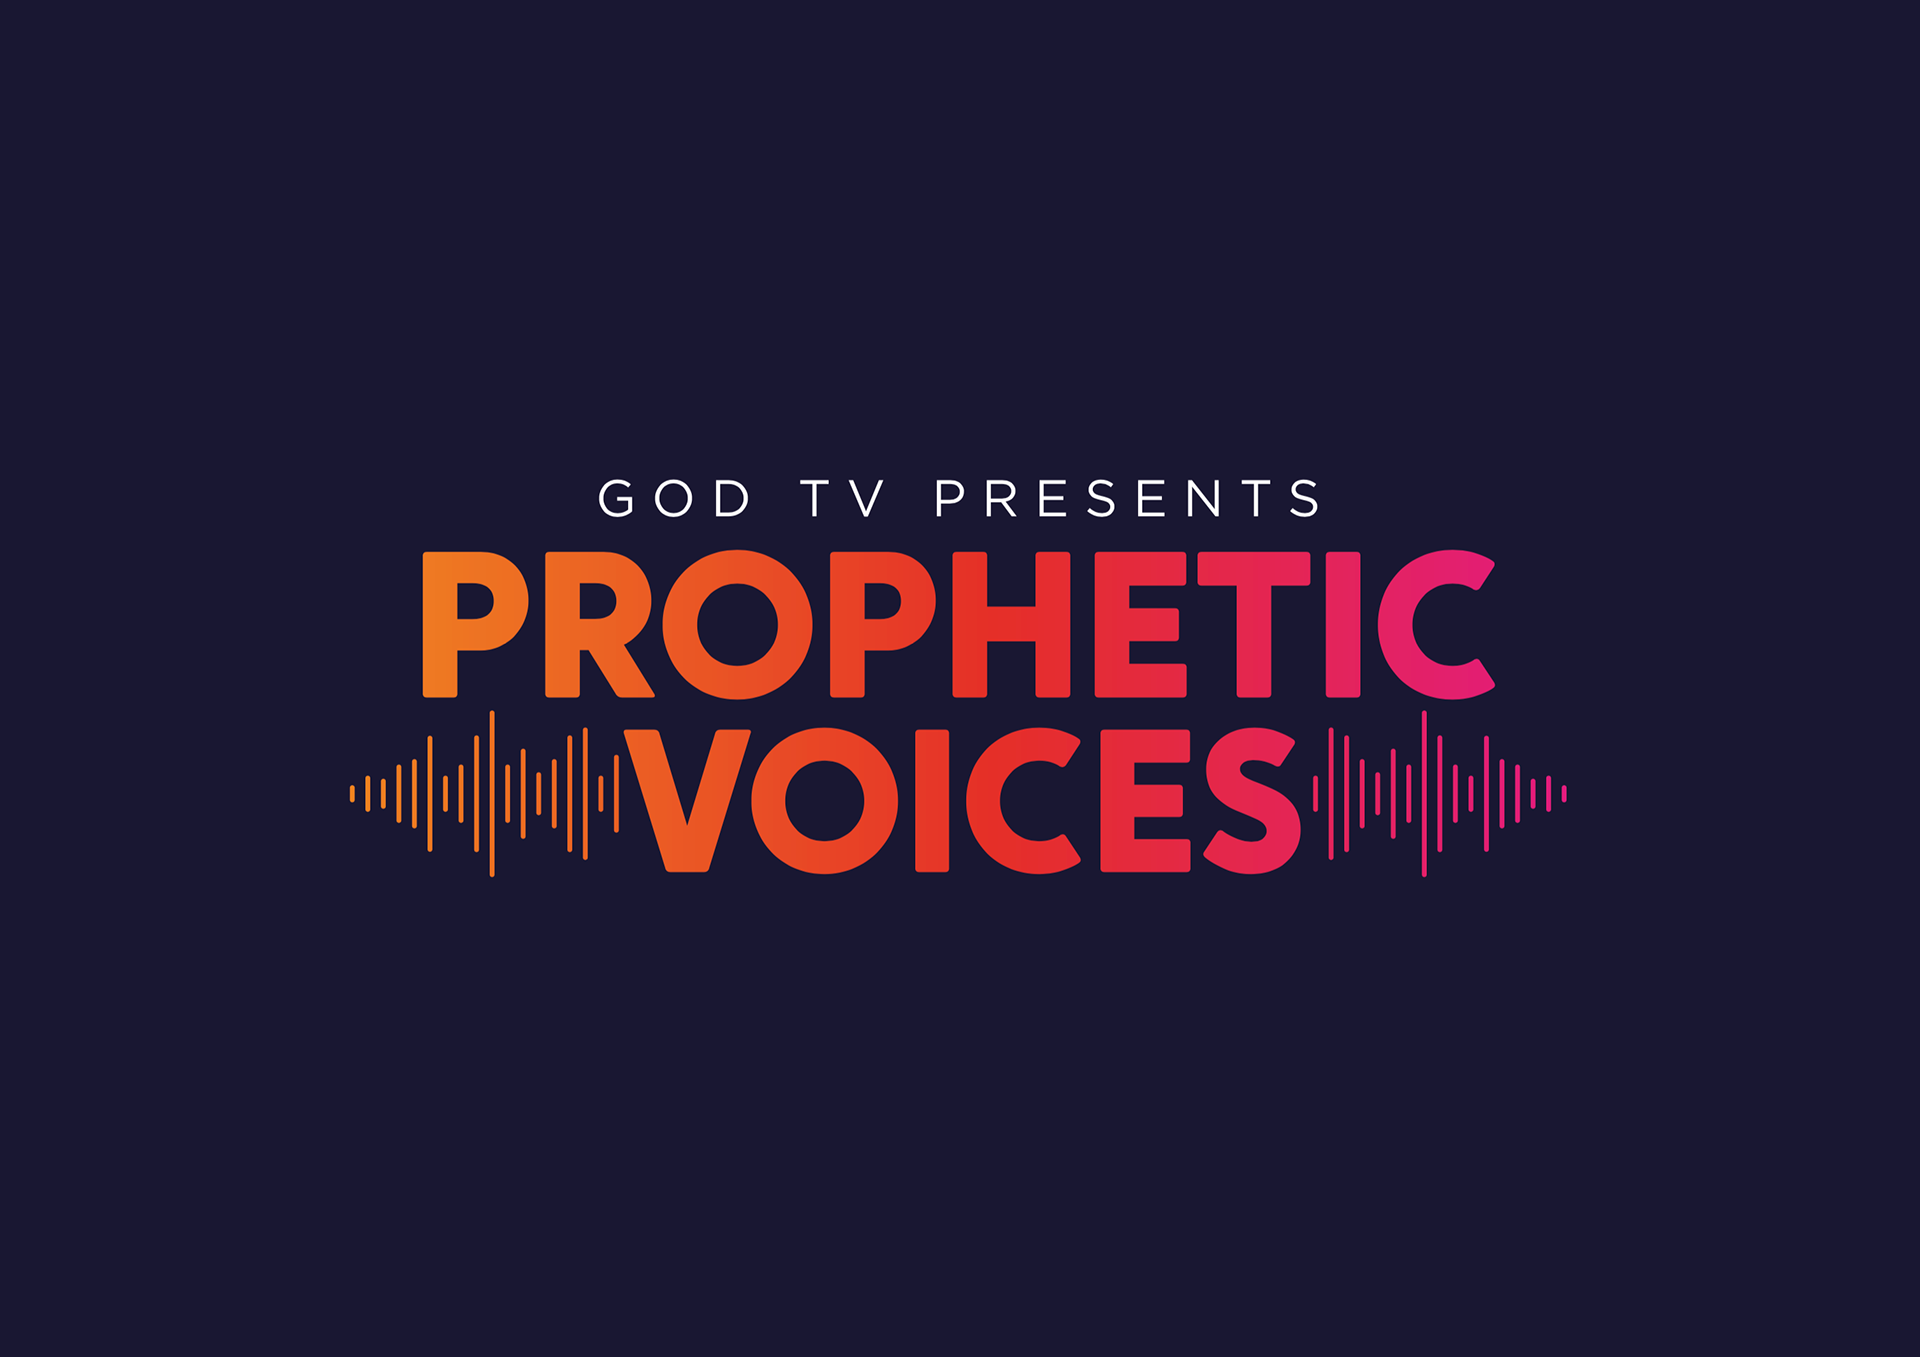 the rise of the prophetic voice pdf free download